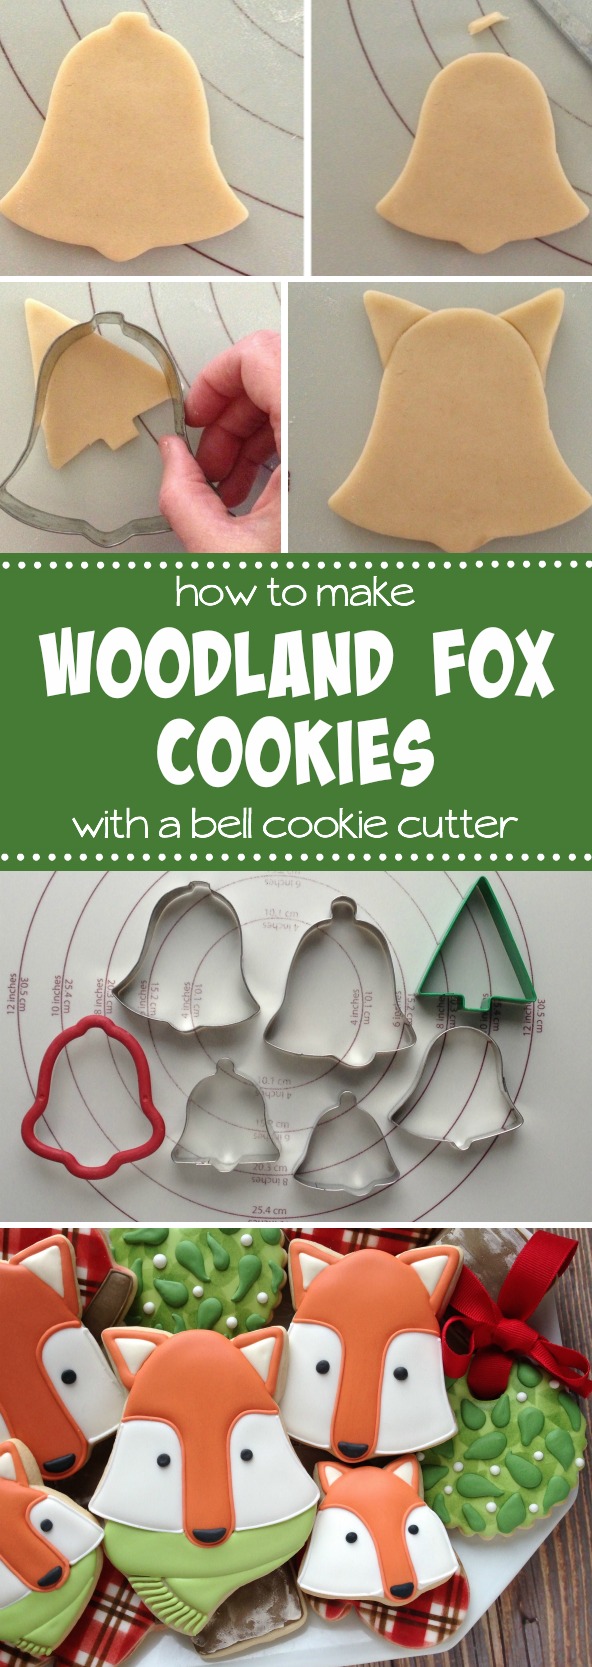 How to make woodland fox cookies with a bell cutter with Clough'D 9 Cookies via Sweetsugarbelle.com